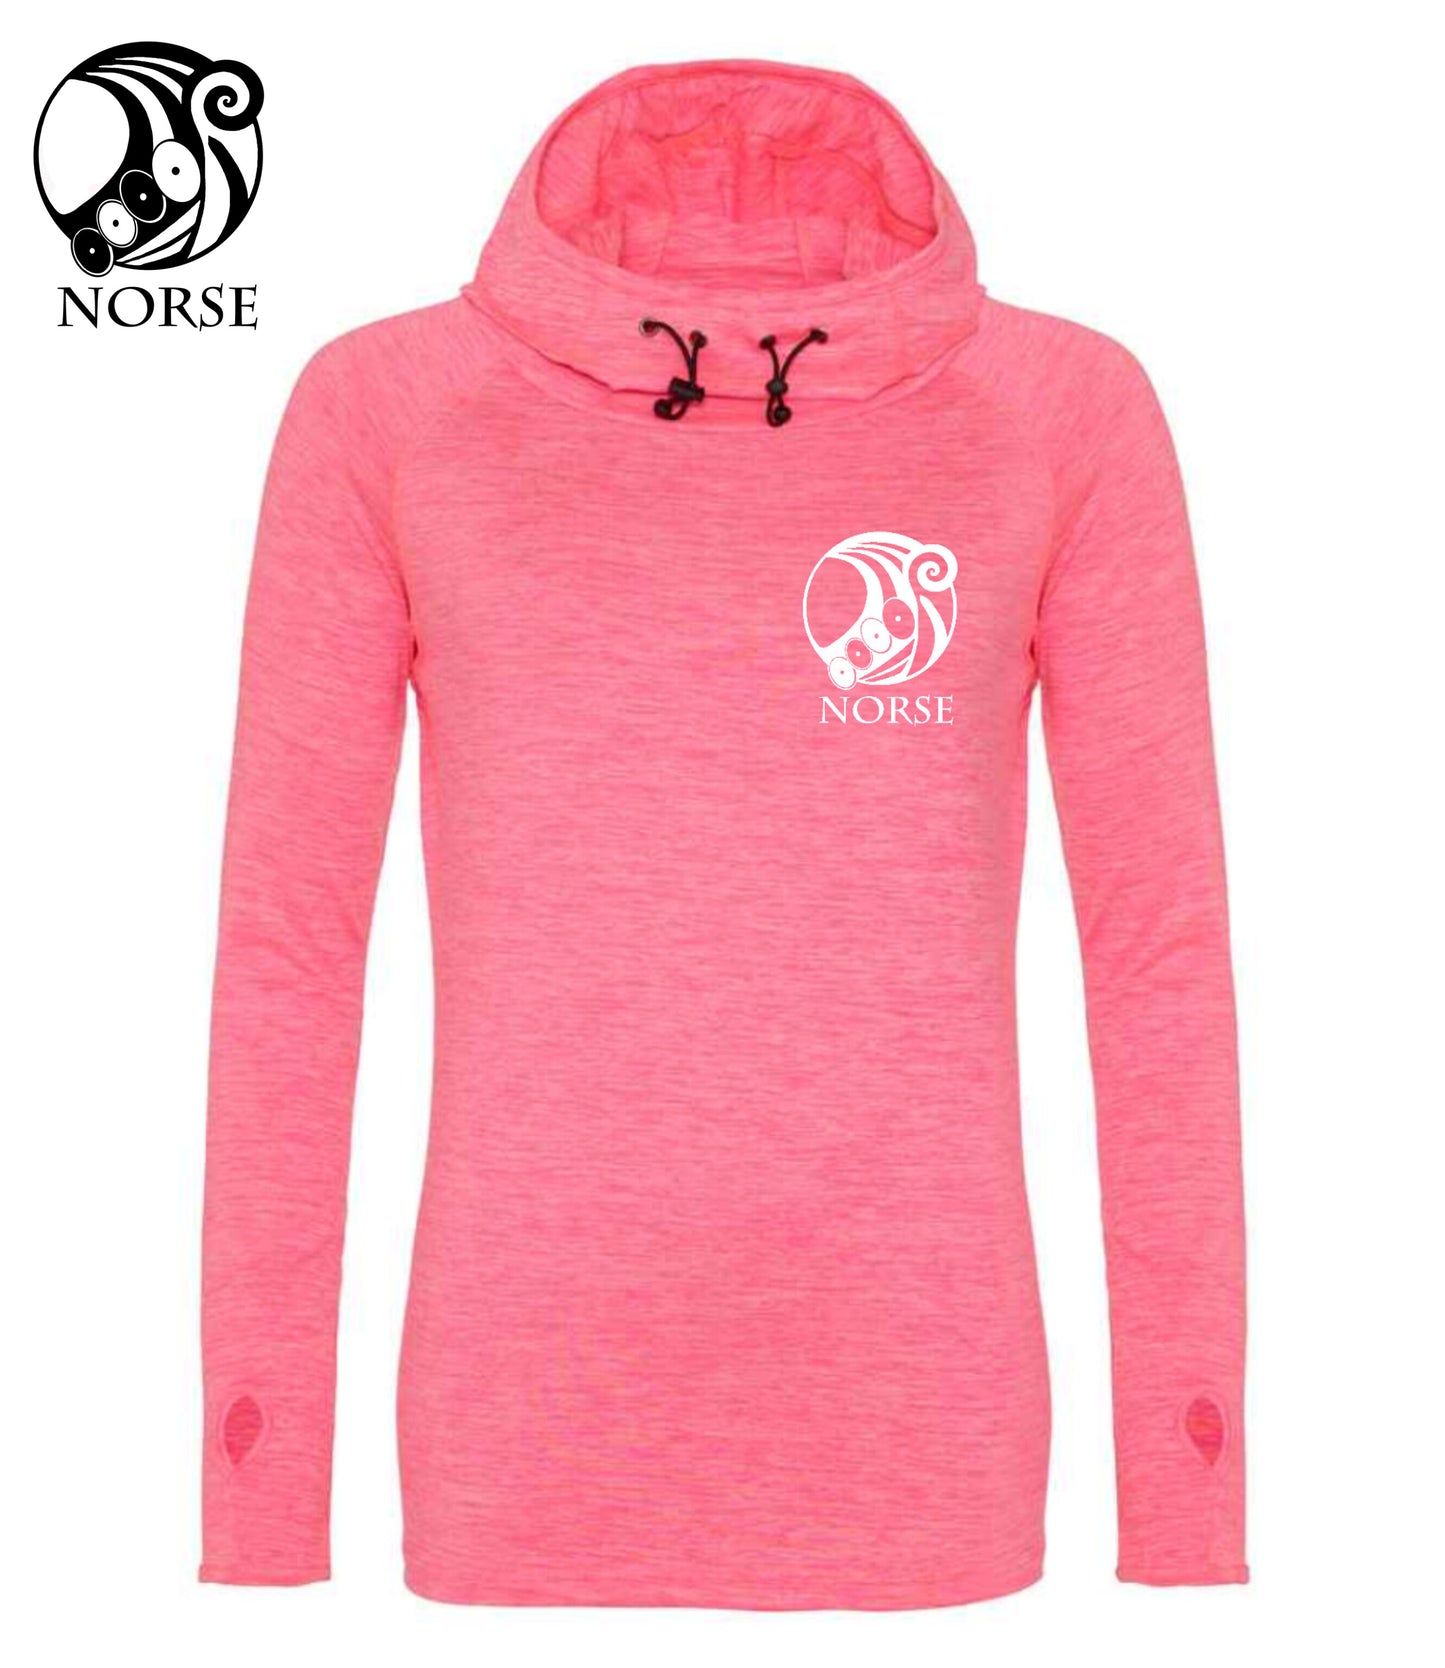 Norse Women's Cool Cowl Neck Vegan Top Electric Pink